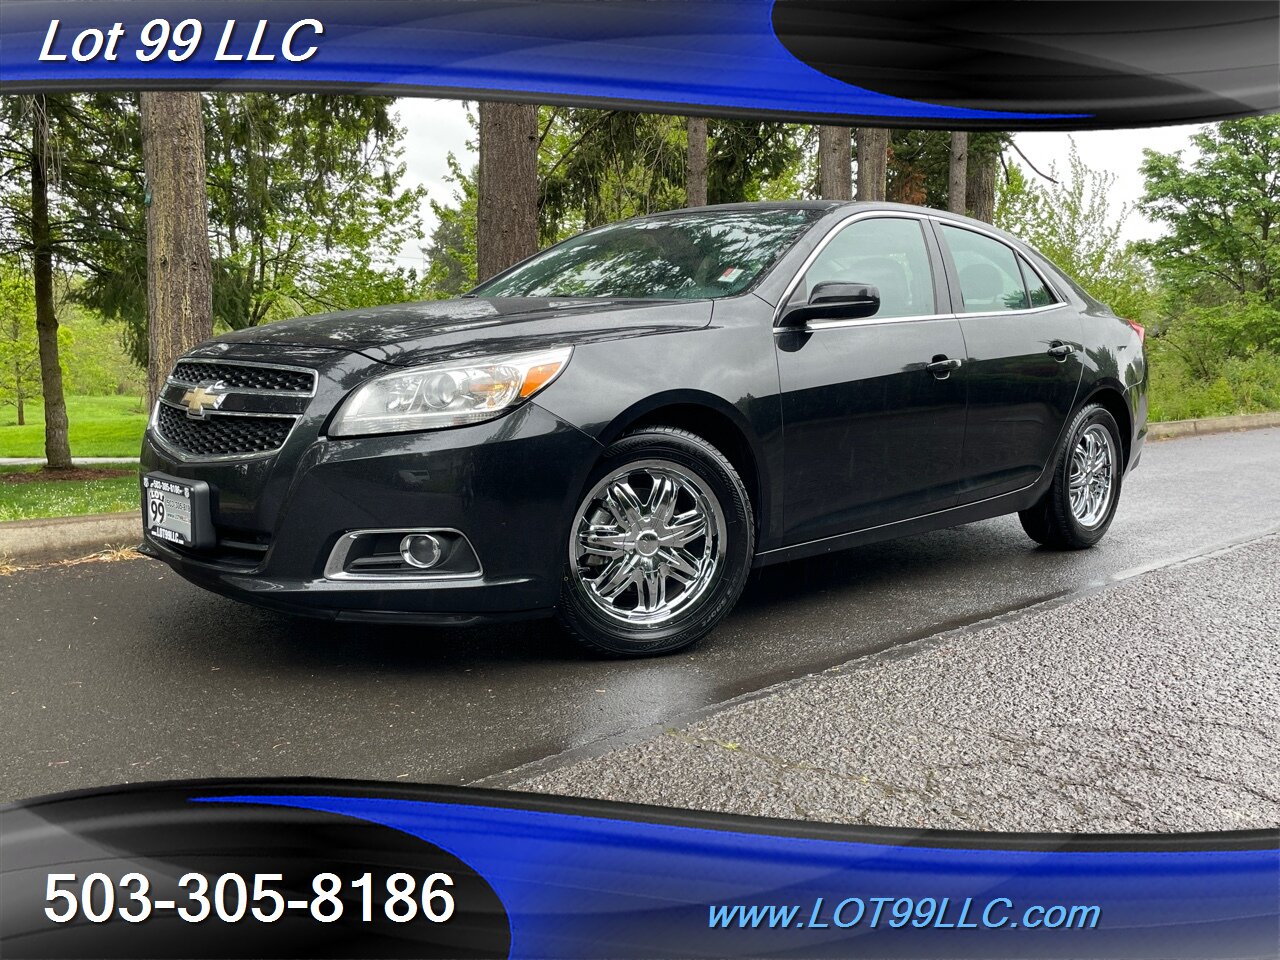 2013 Chevrolet Malibu Eco 1-Owner 58k Miles 37MPG Htd Leather Moon Roof   - Photo 2 - Milwaukie, OR 97267